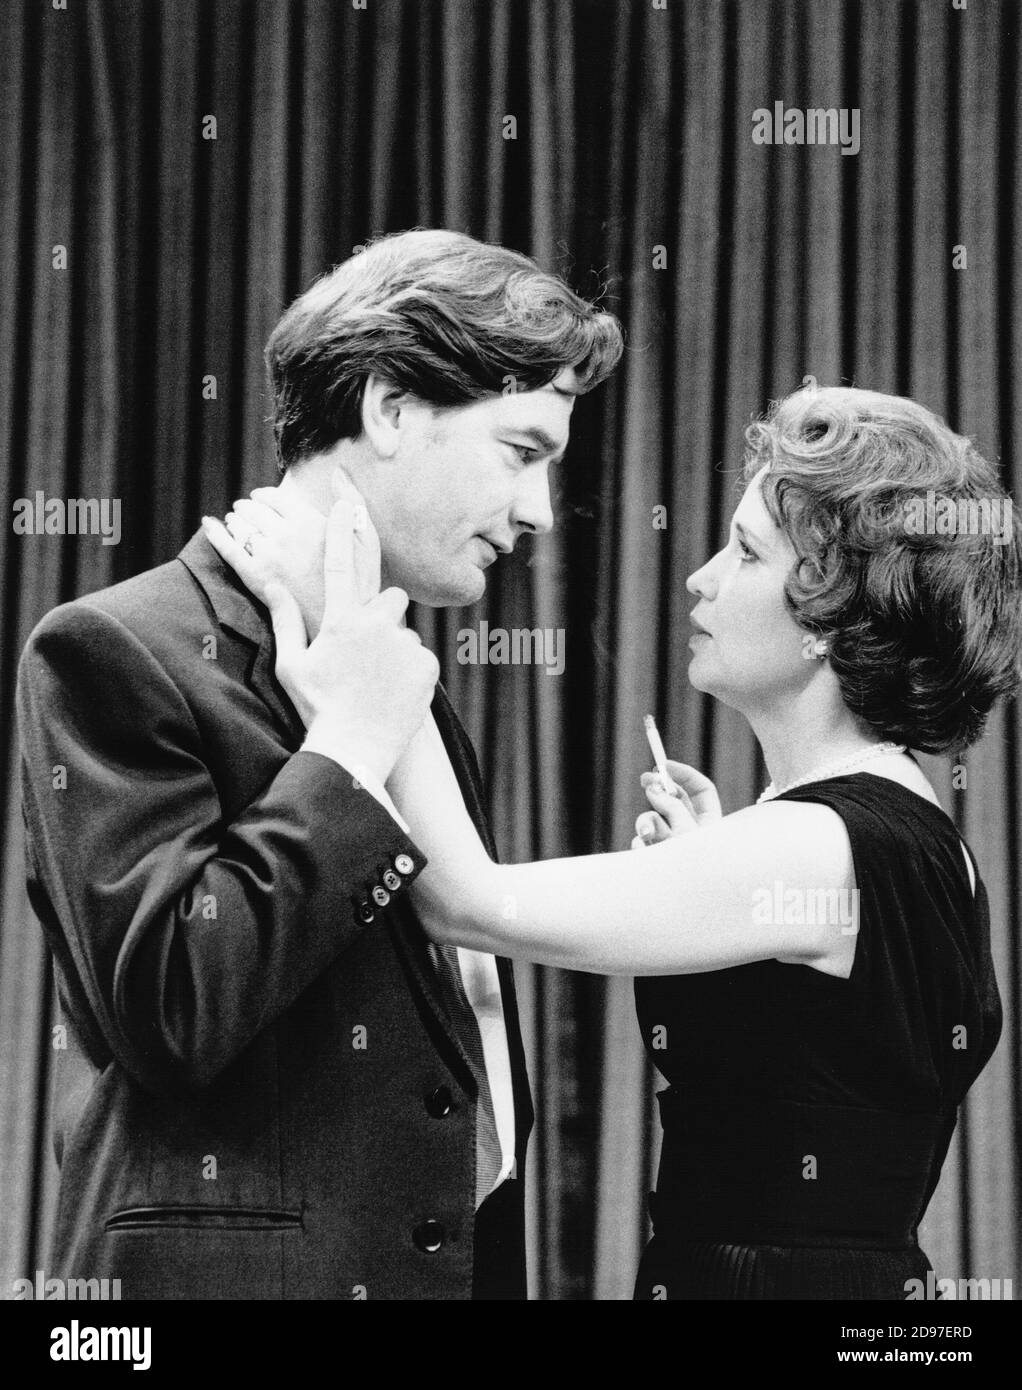 THE COMPLAISANT LOVER  by Graham Greene  design: Michael Pavelka  lighting: Robert Ornbo  director: Richard Olivier  Andrew Hawkins (Clive Root), Susan Penhaligon (Mary Rhodes) Palace Theatre, Watford, England  08/10/1991                 (c) Donald Cooper/Photostage   photos@photostage.co.uk   ref/BW-P-327-5 Stock Photo